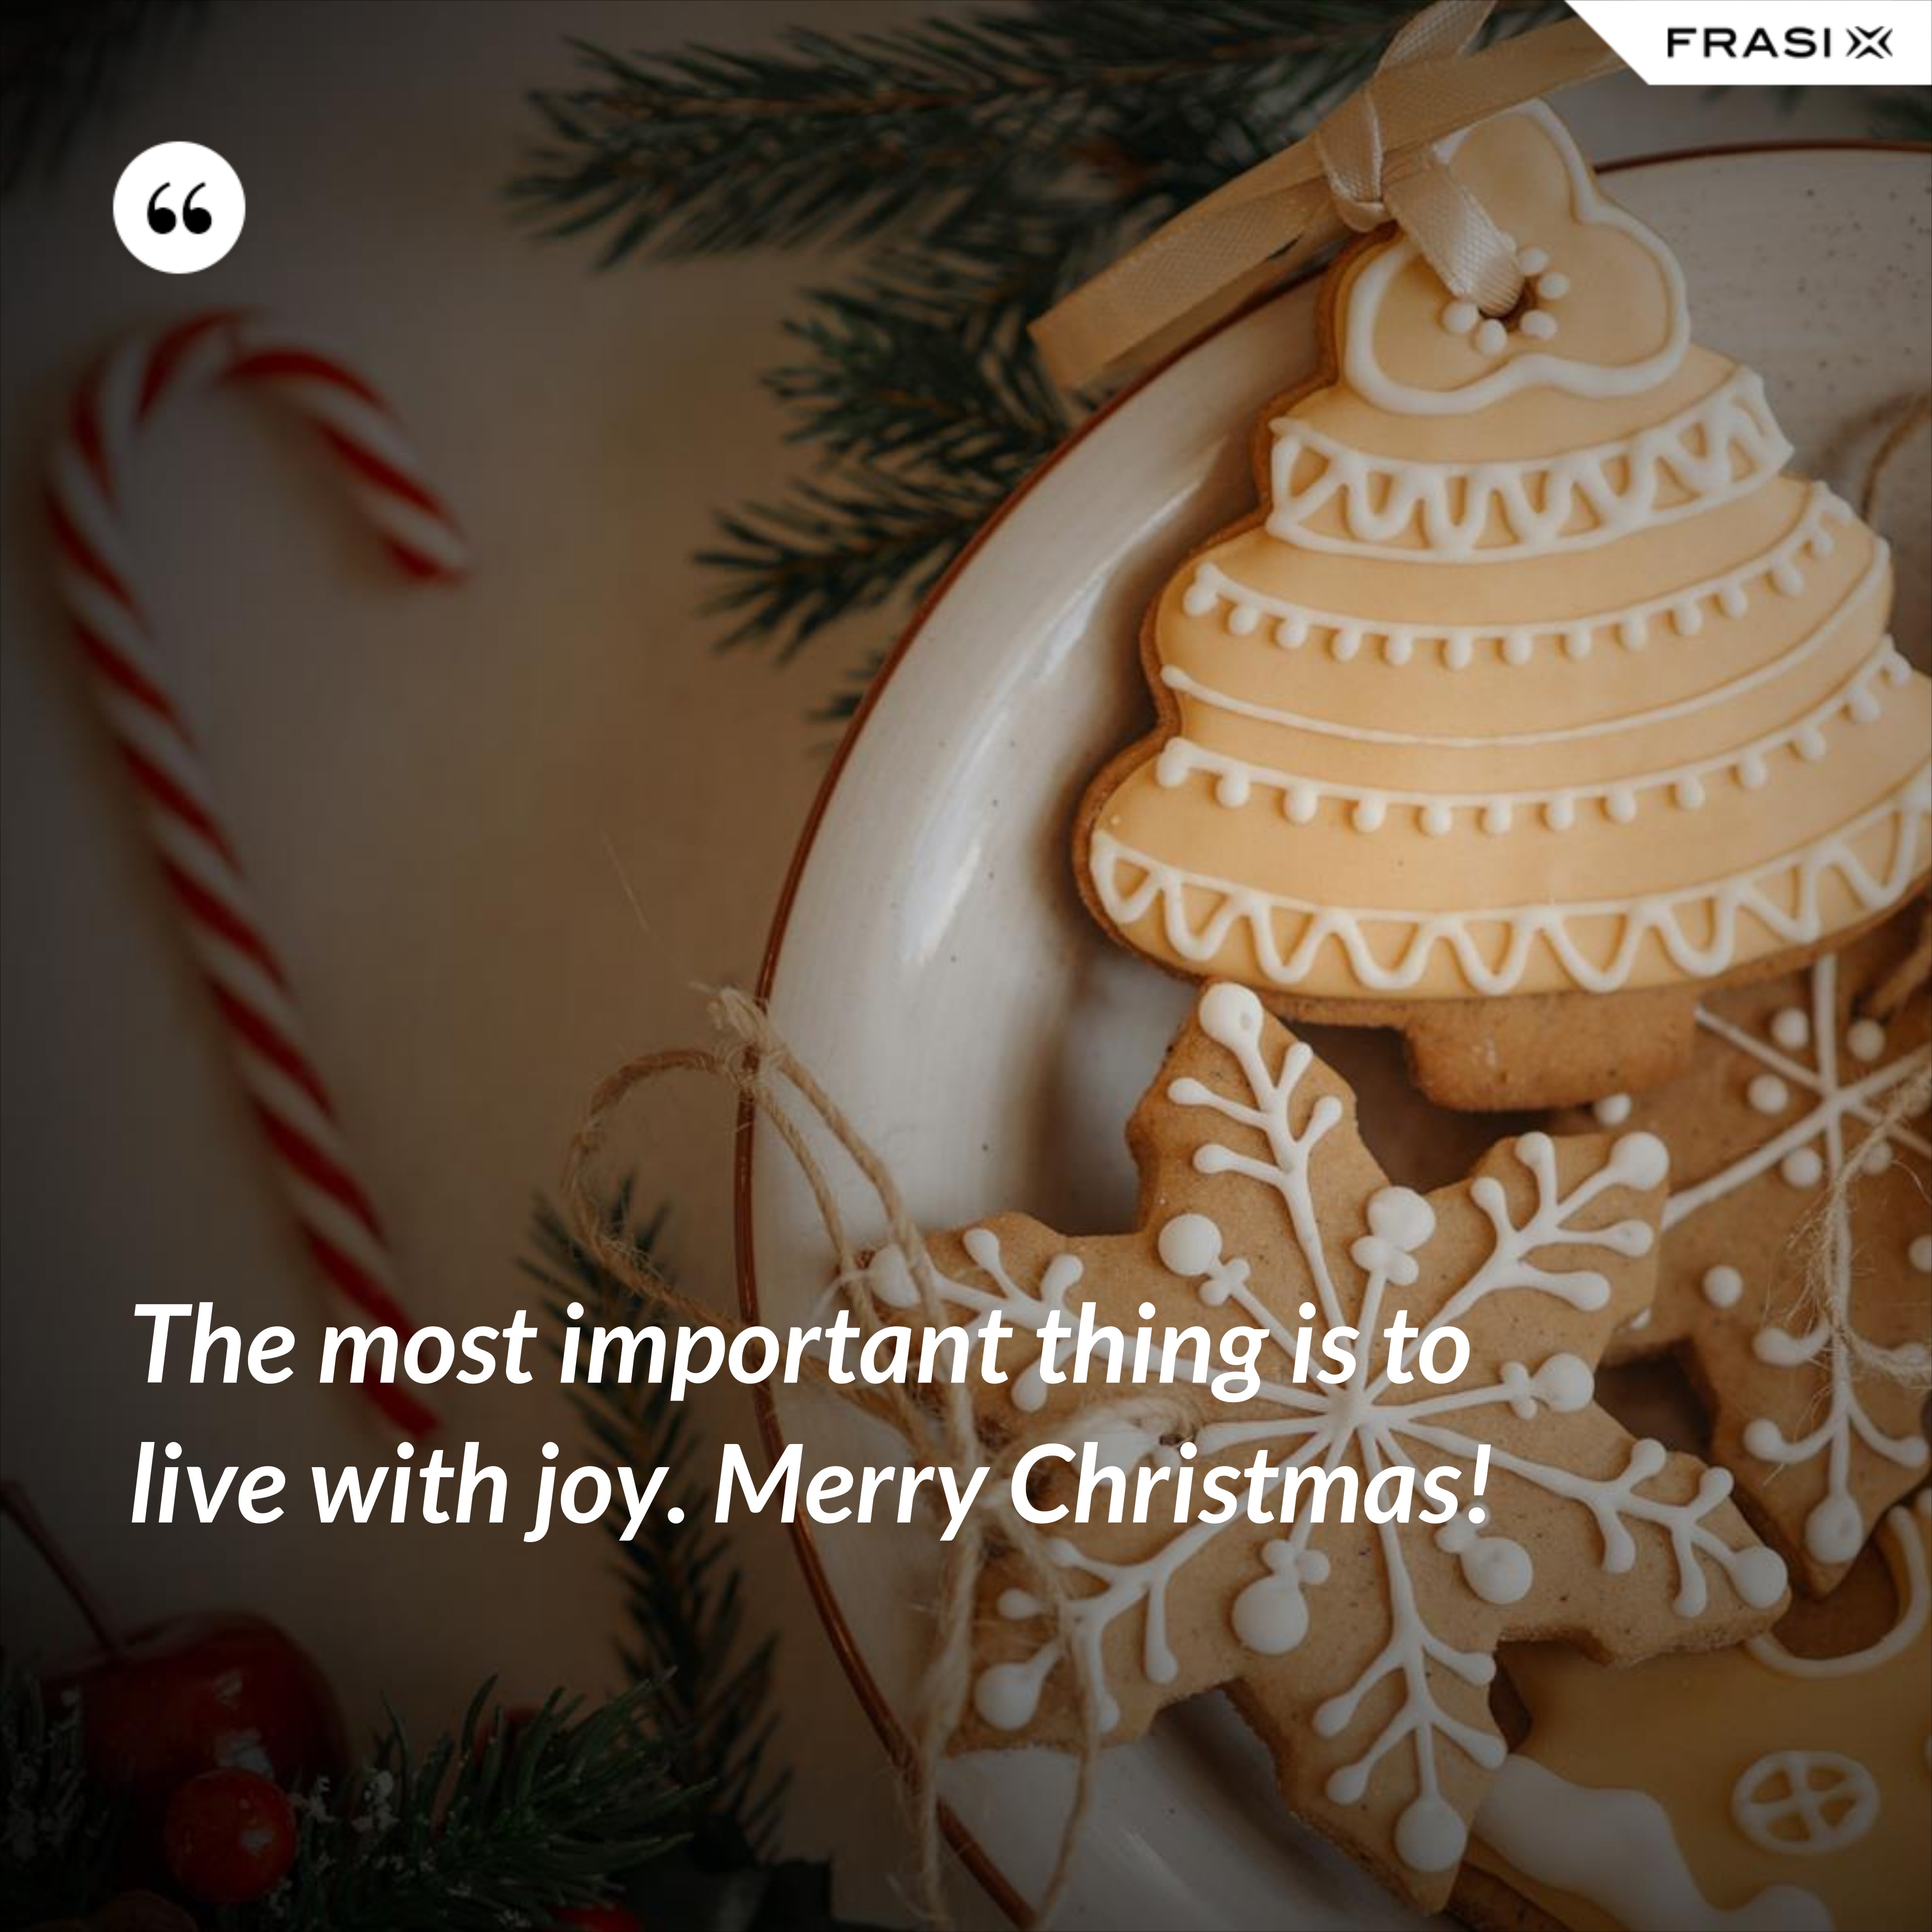 The most important thing is to live with joy. Merry Christmas! - Anonimo